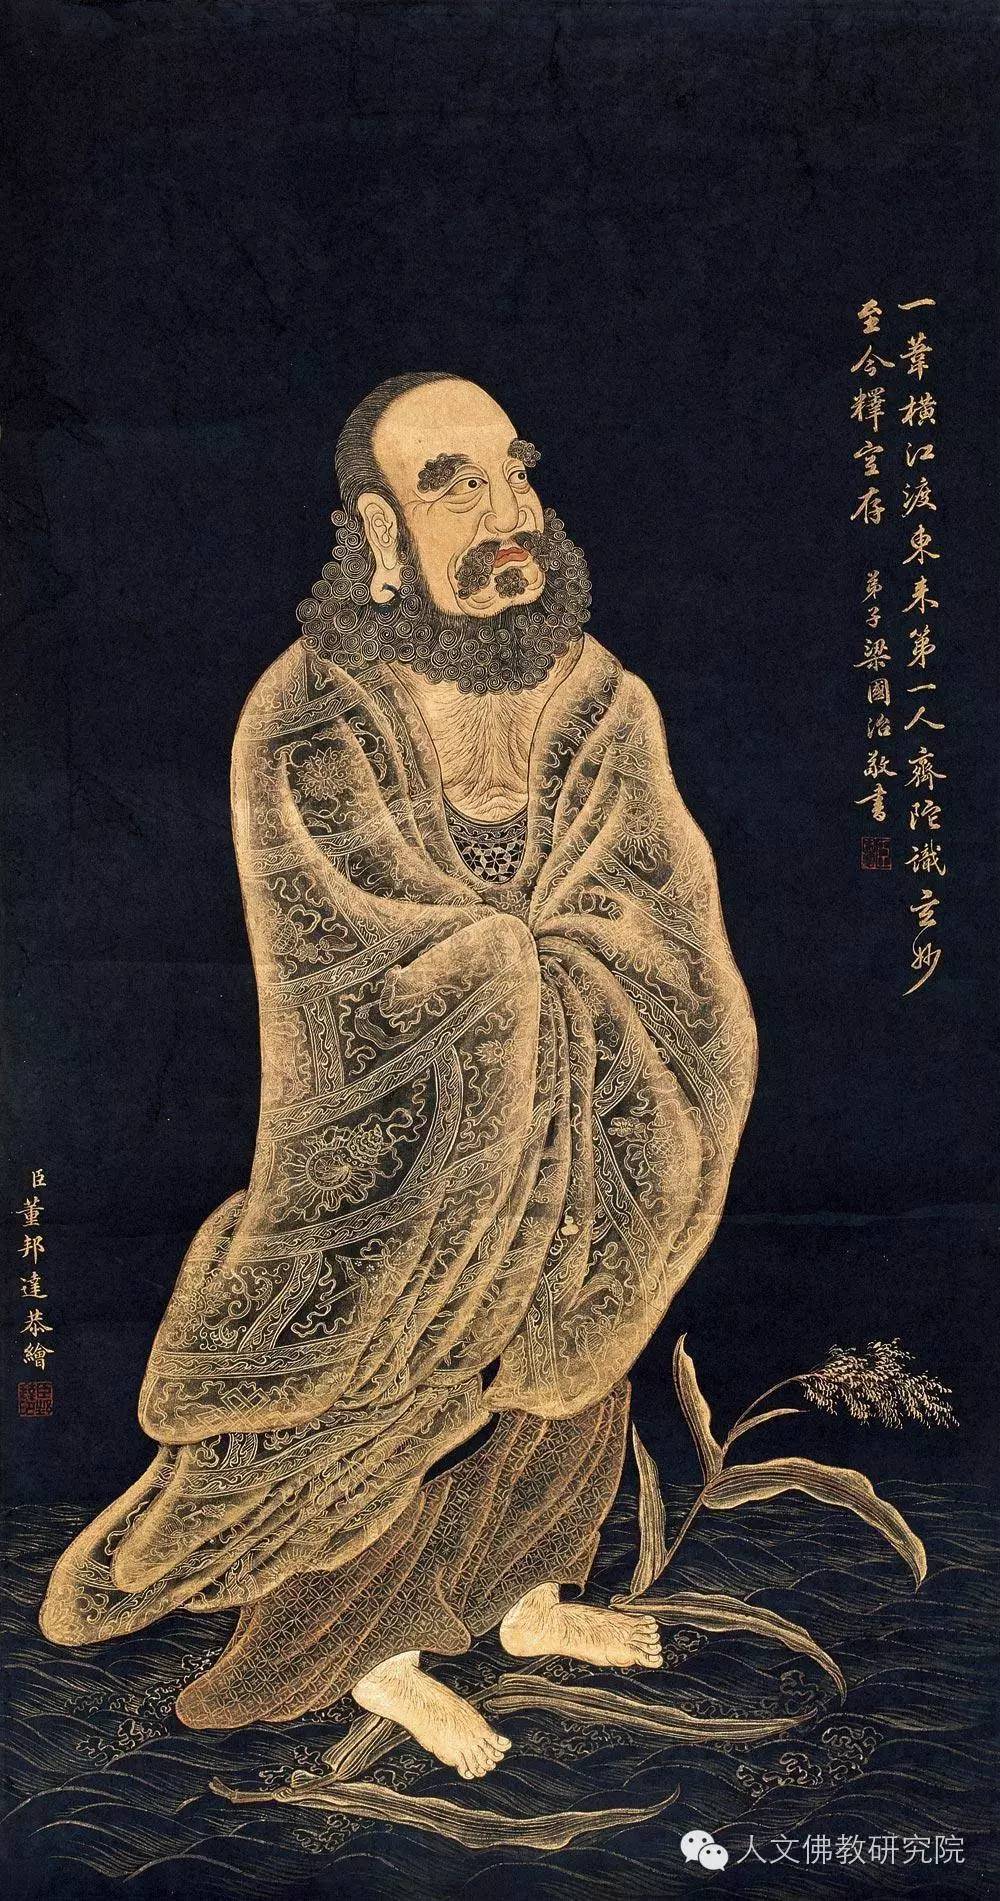 Bodhidharma crossing the Yangtze river on a reed